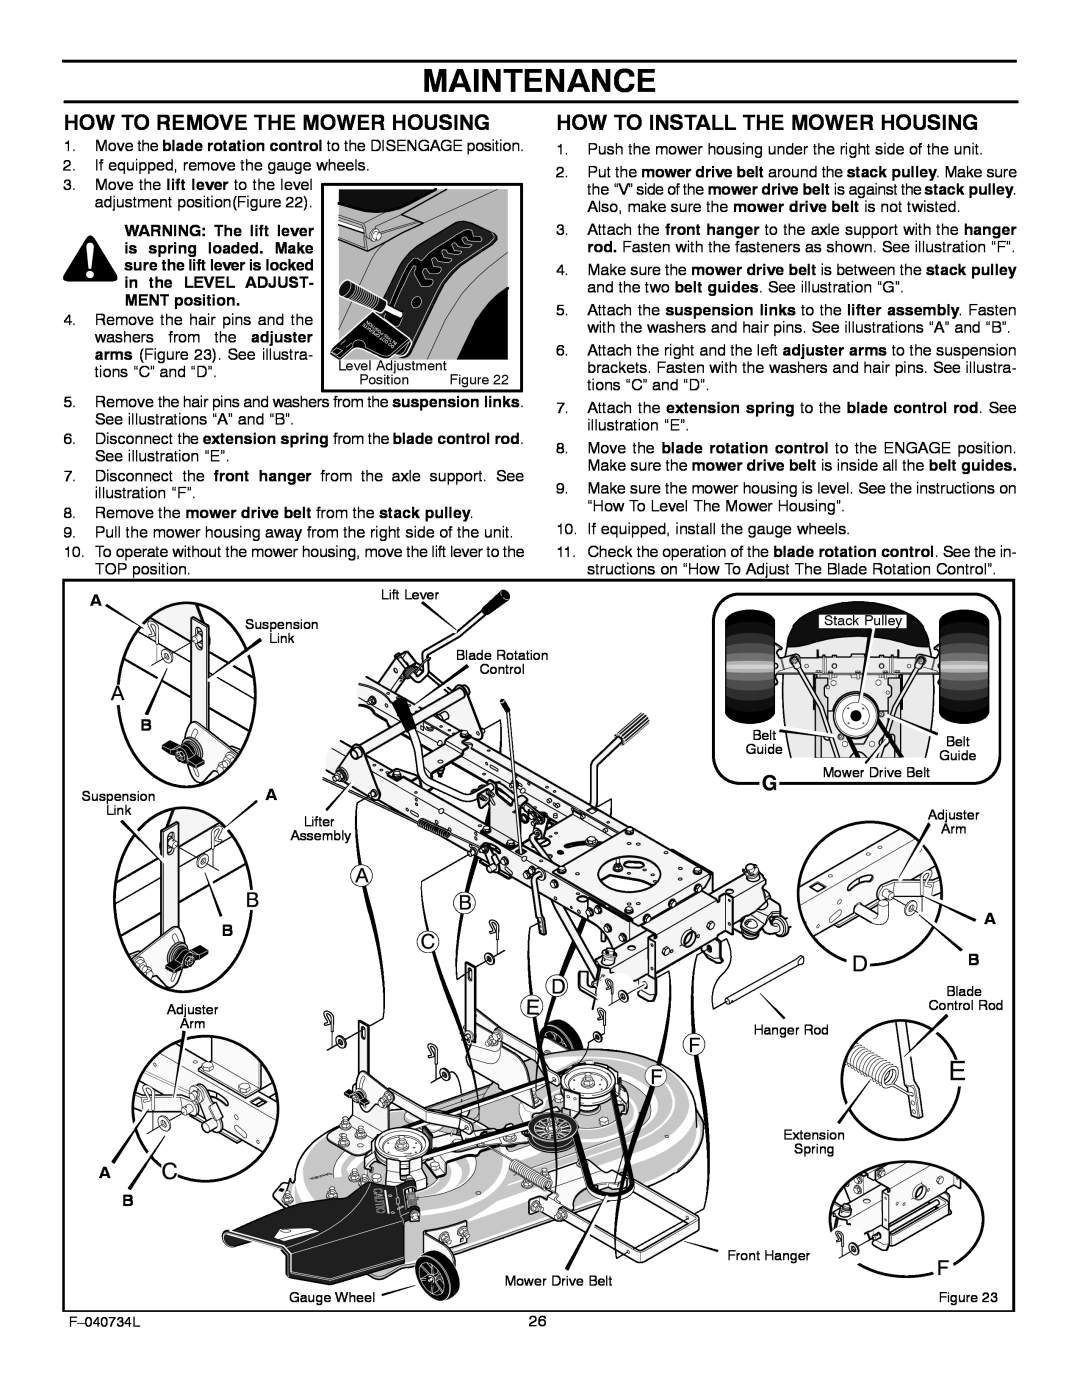 Murray 425015x92A manual Maintenance, How To Remove The Mower Housing, How To Install The Mower Housing 